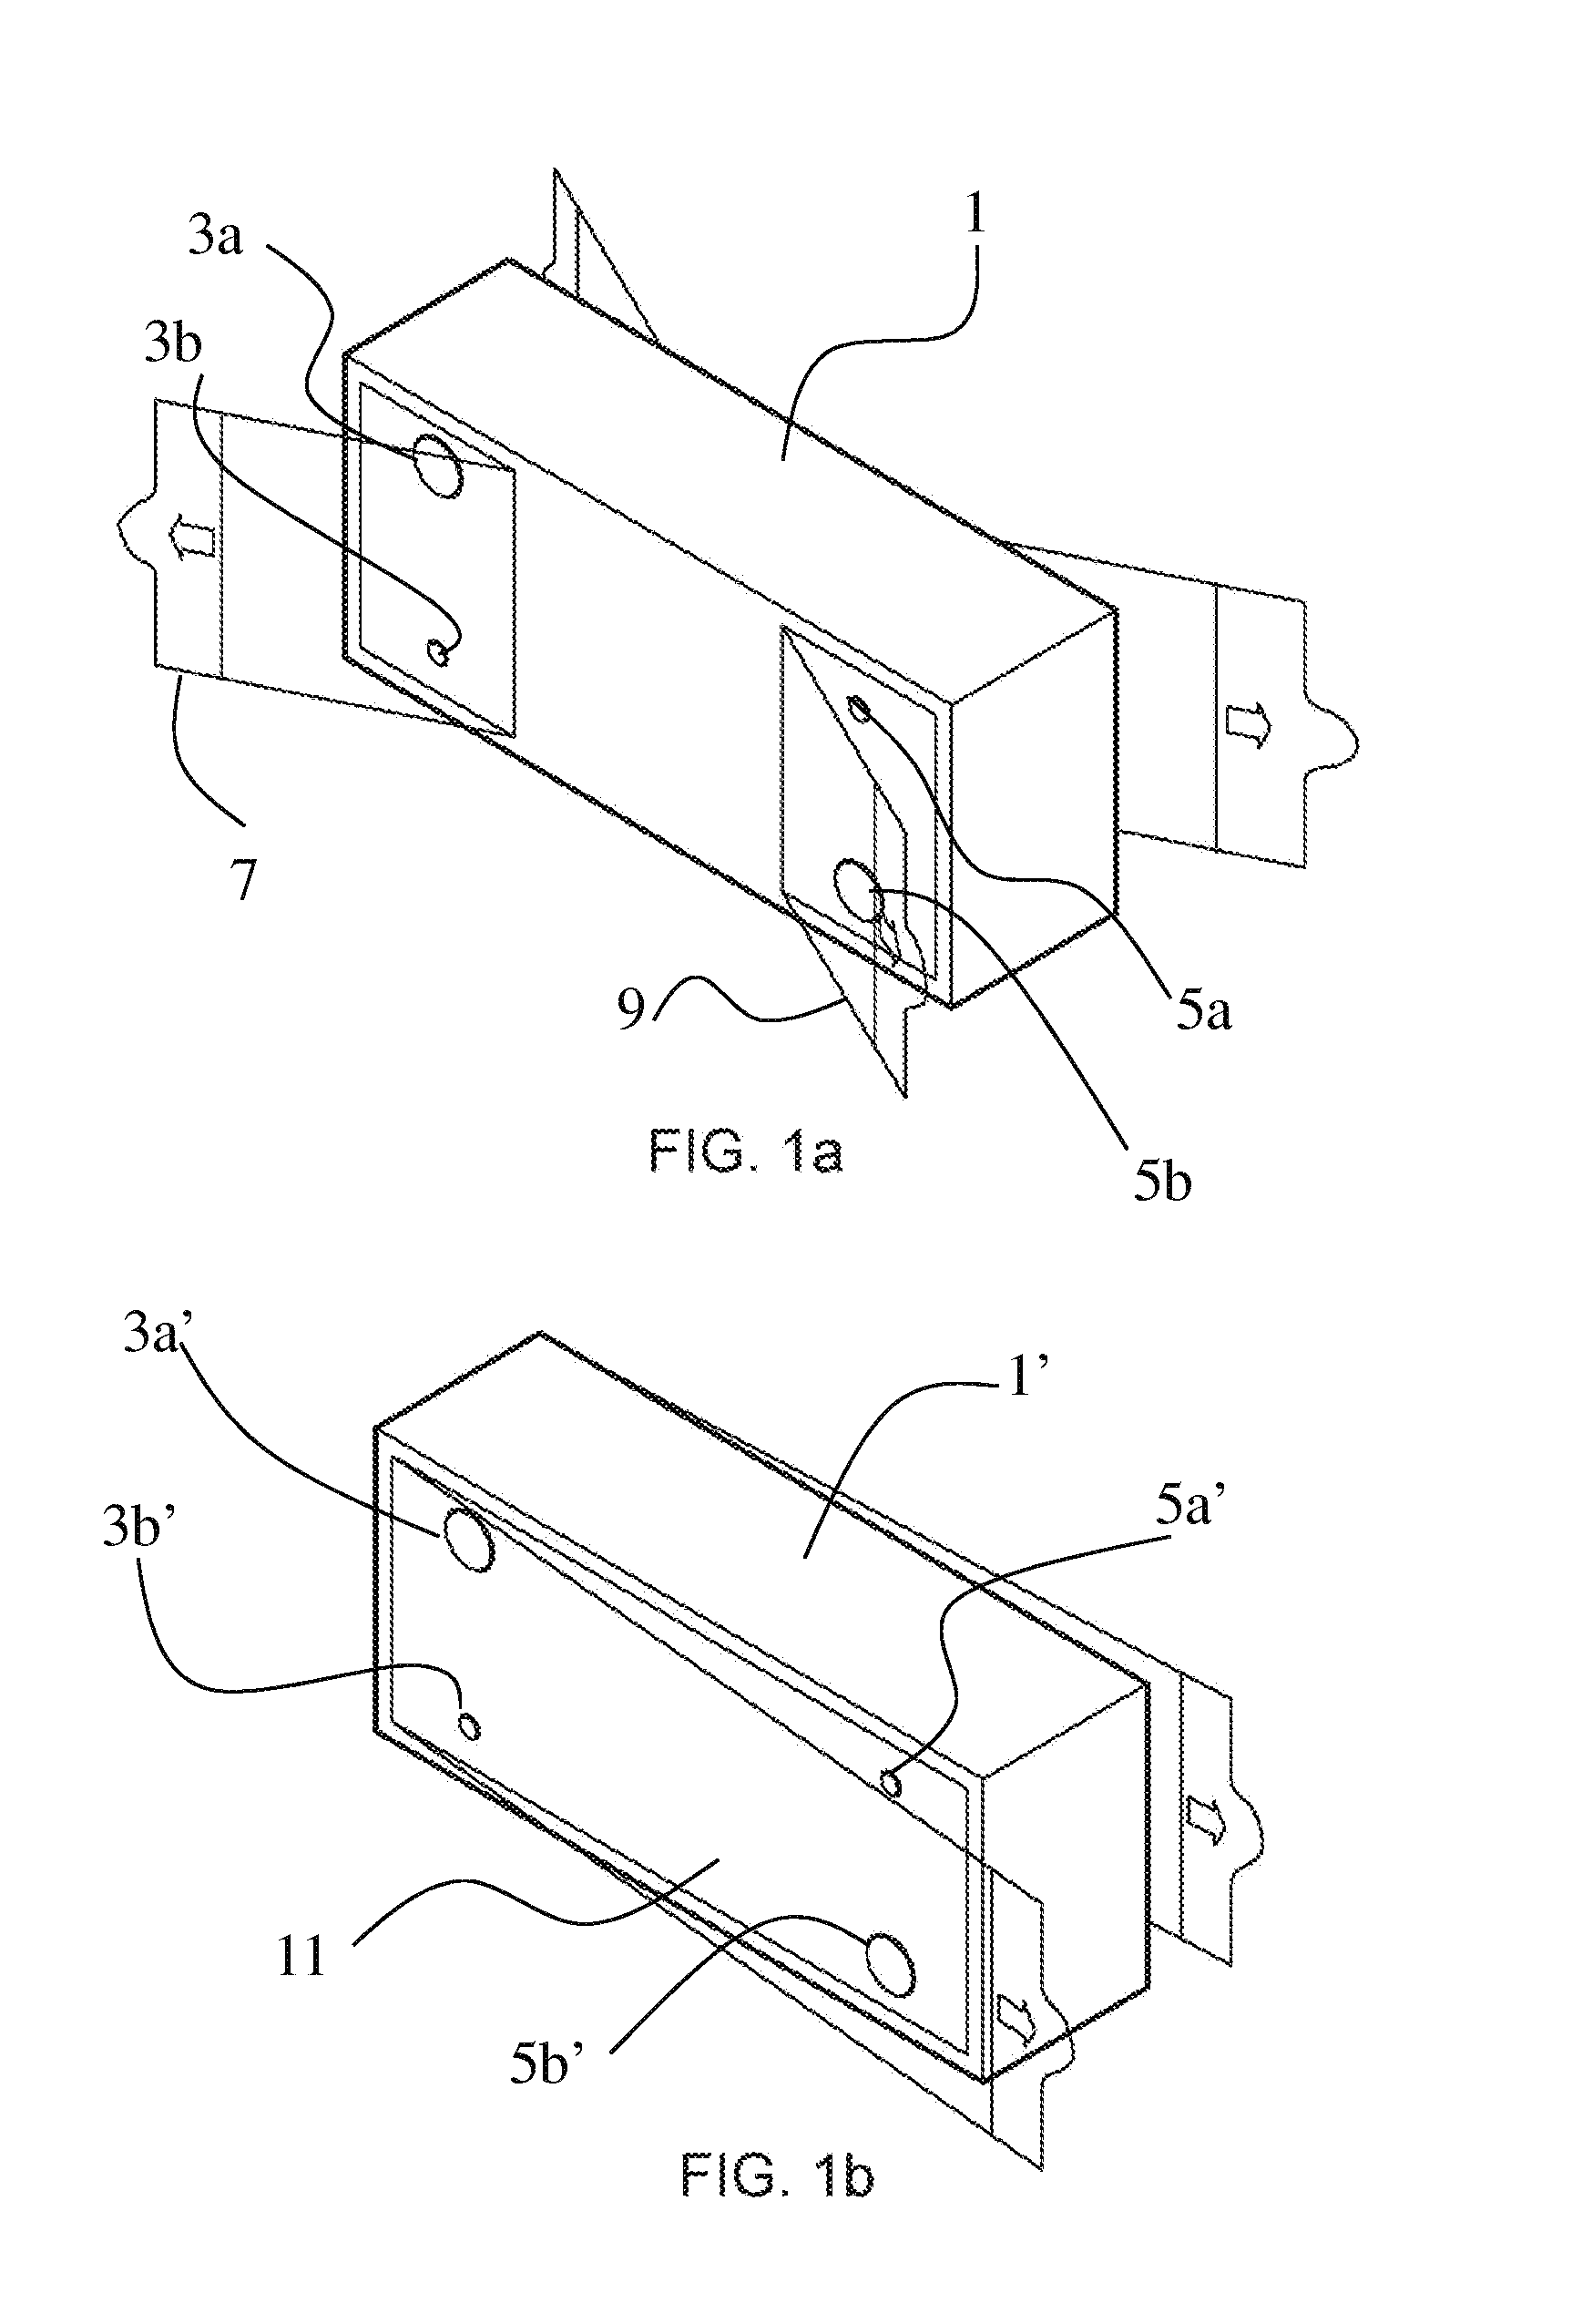 Aseptic connection of separation or reaction systems